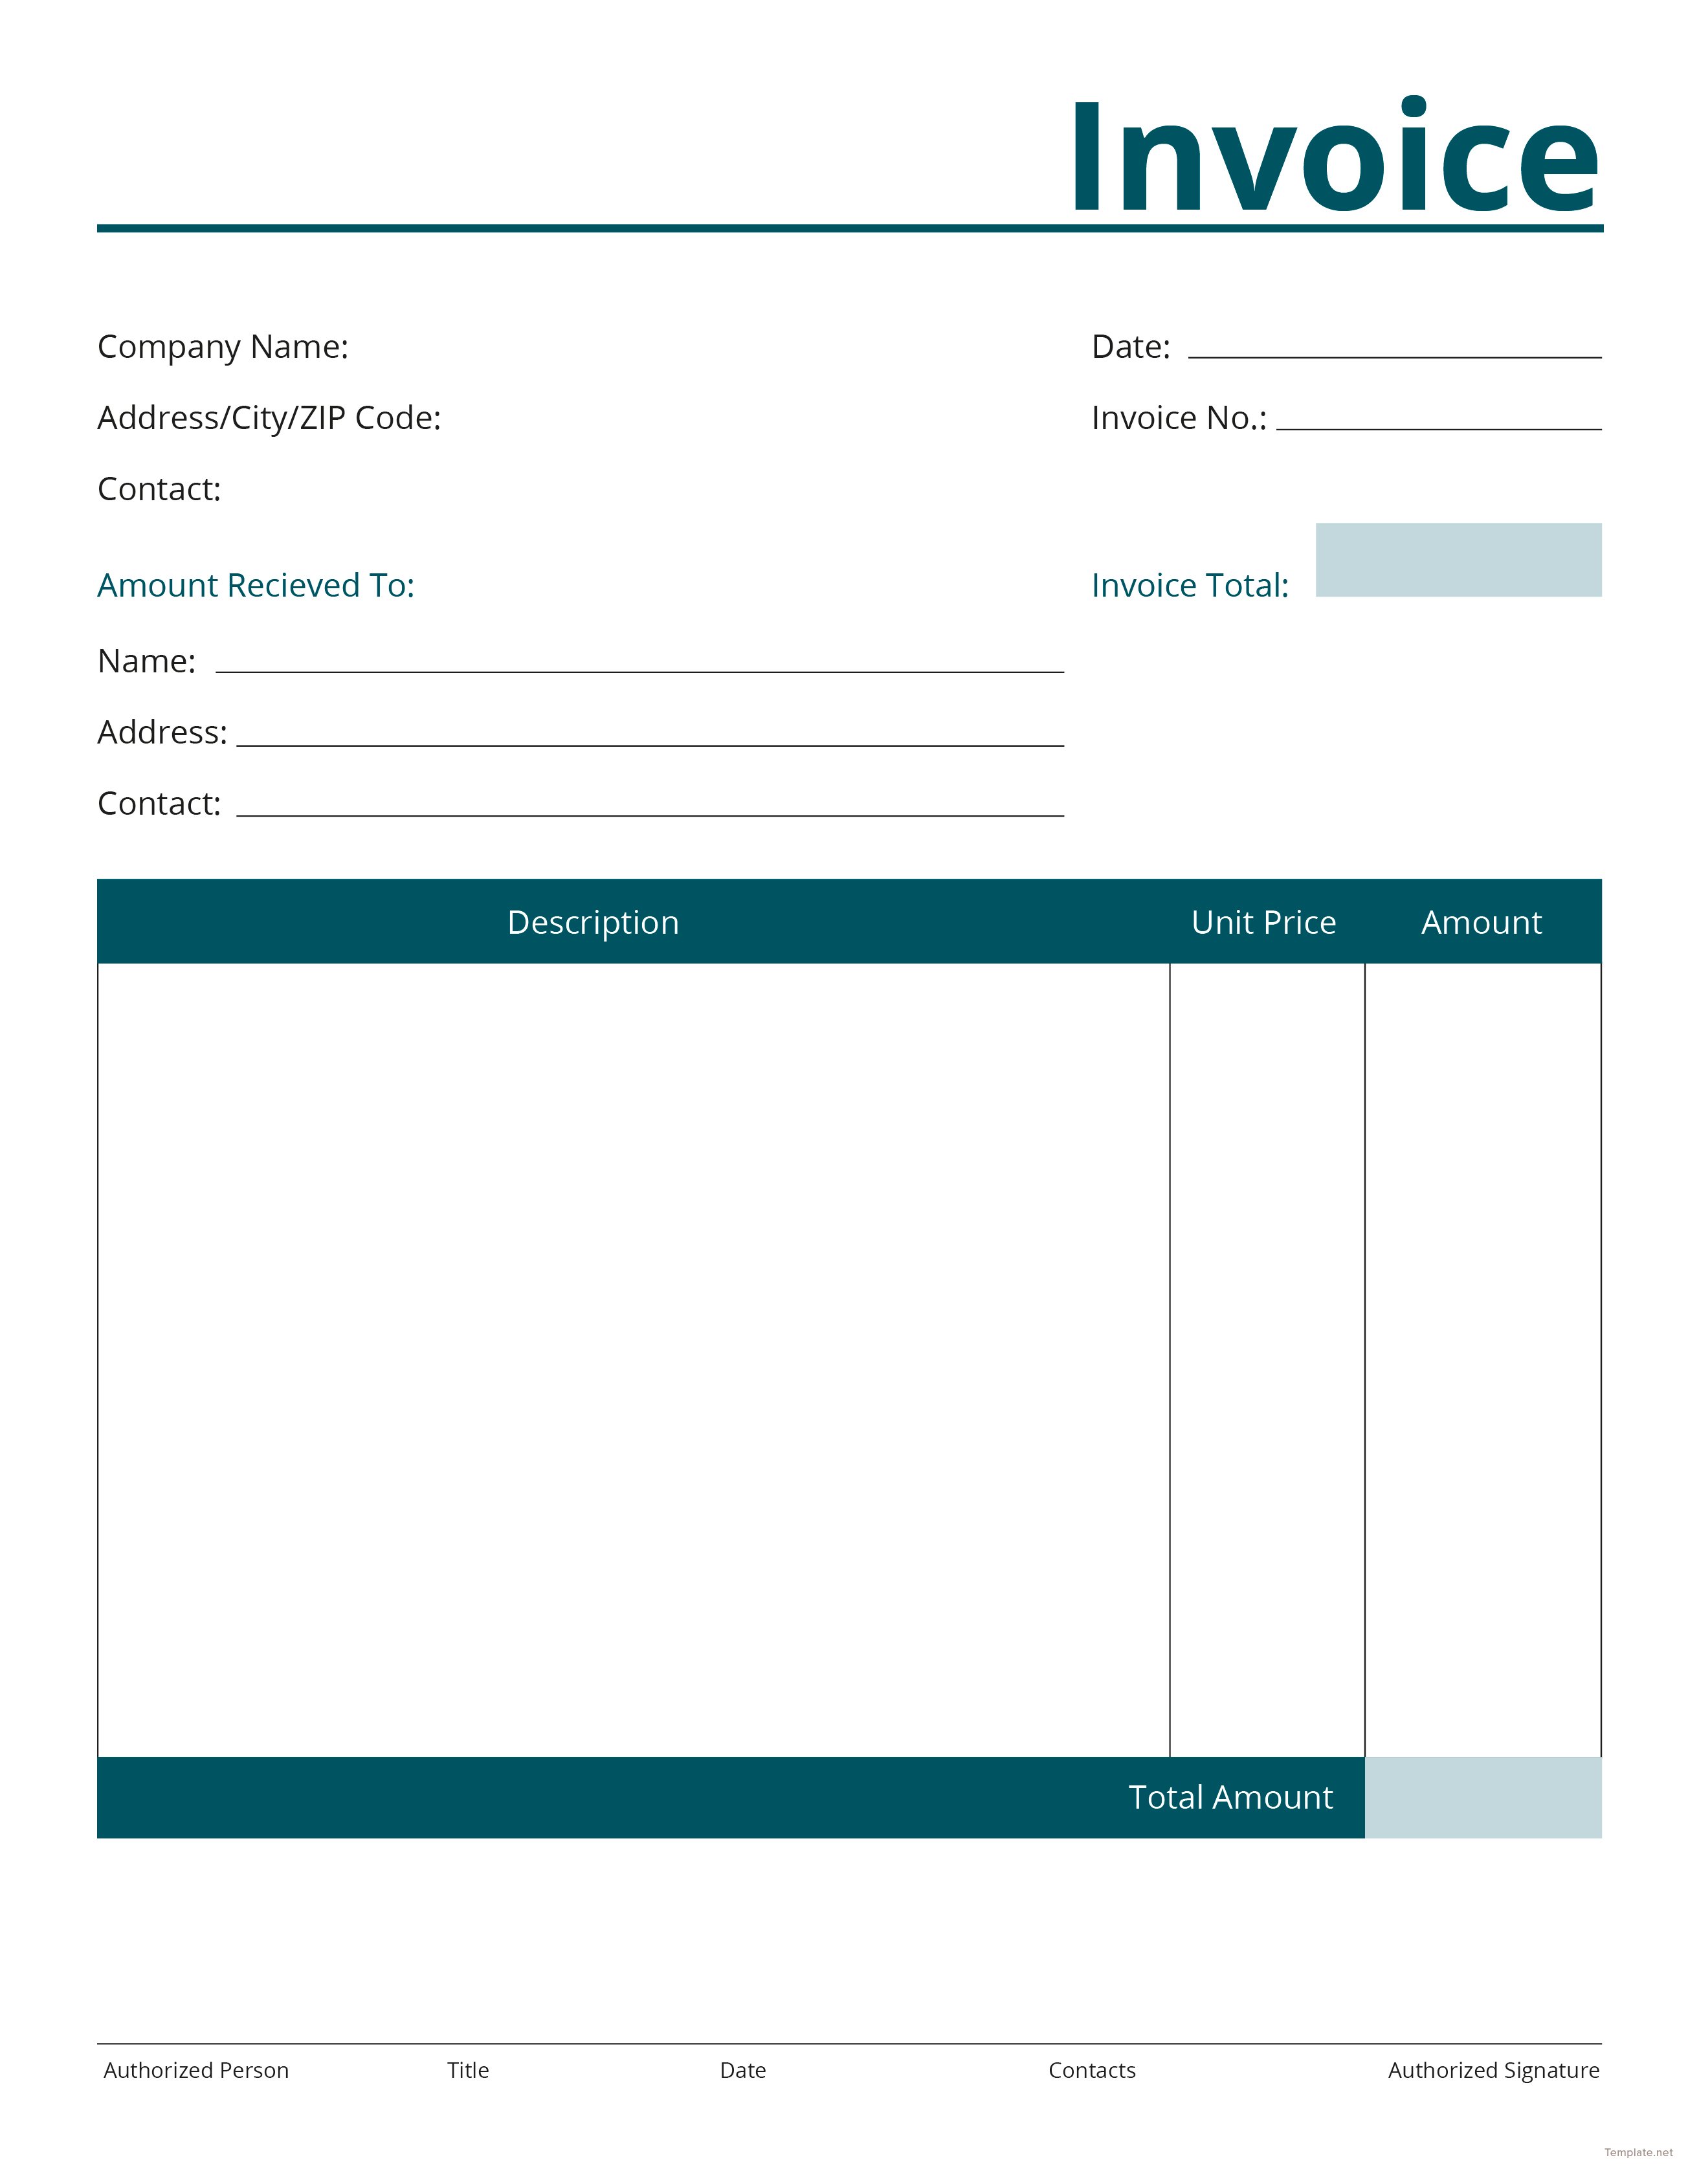 Free Blank Commercial Invoice Template in Adobe Illustrator